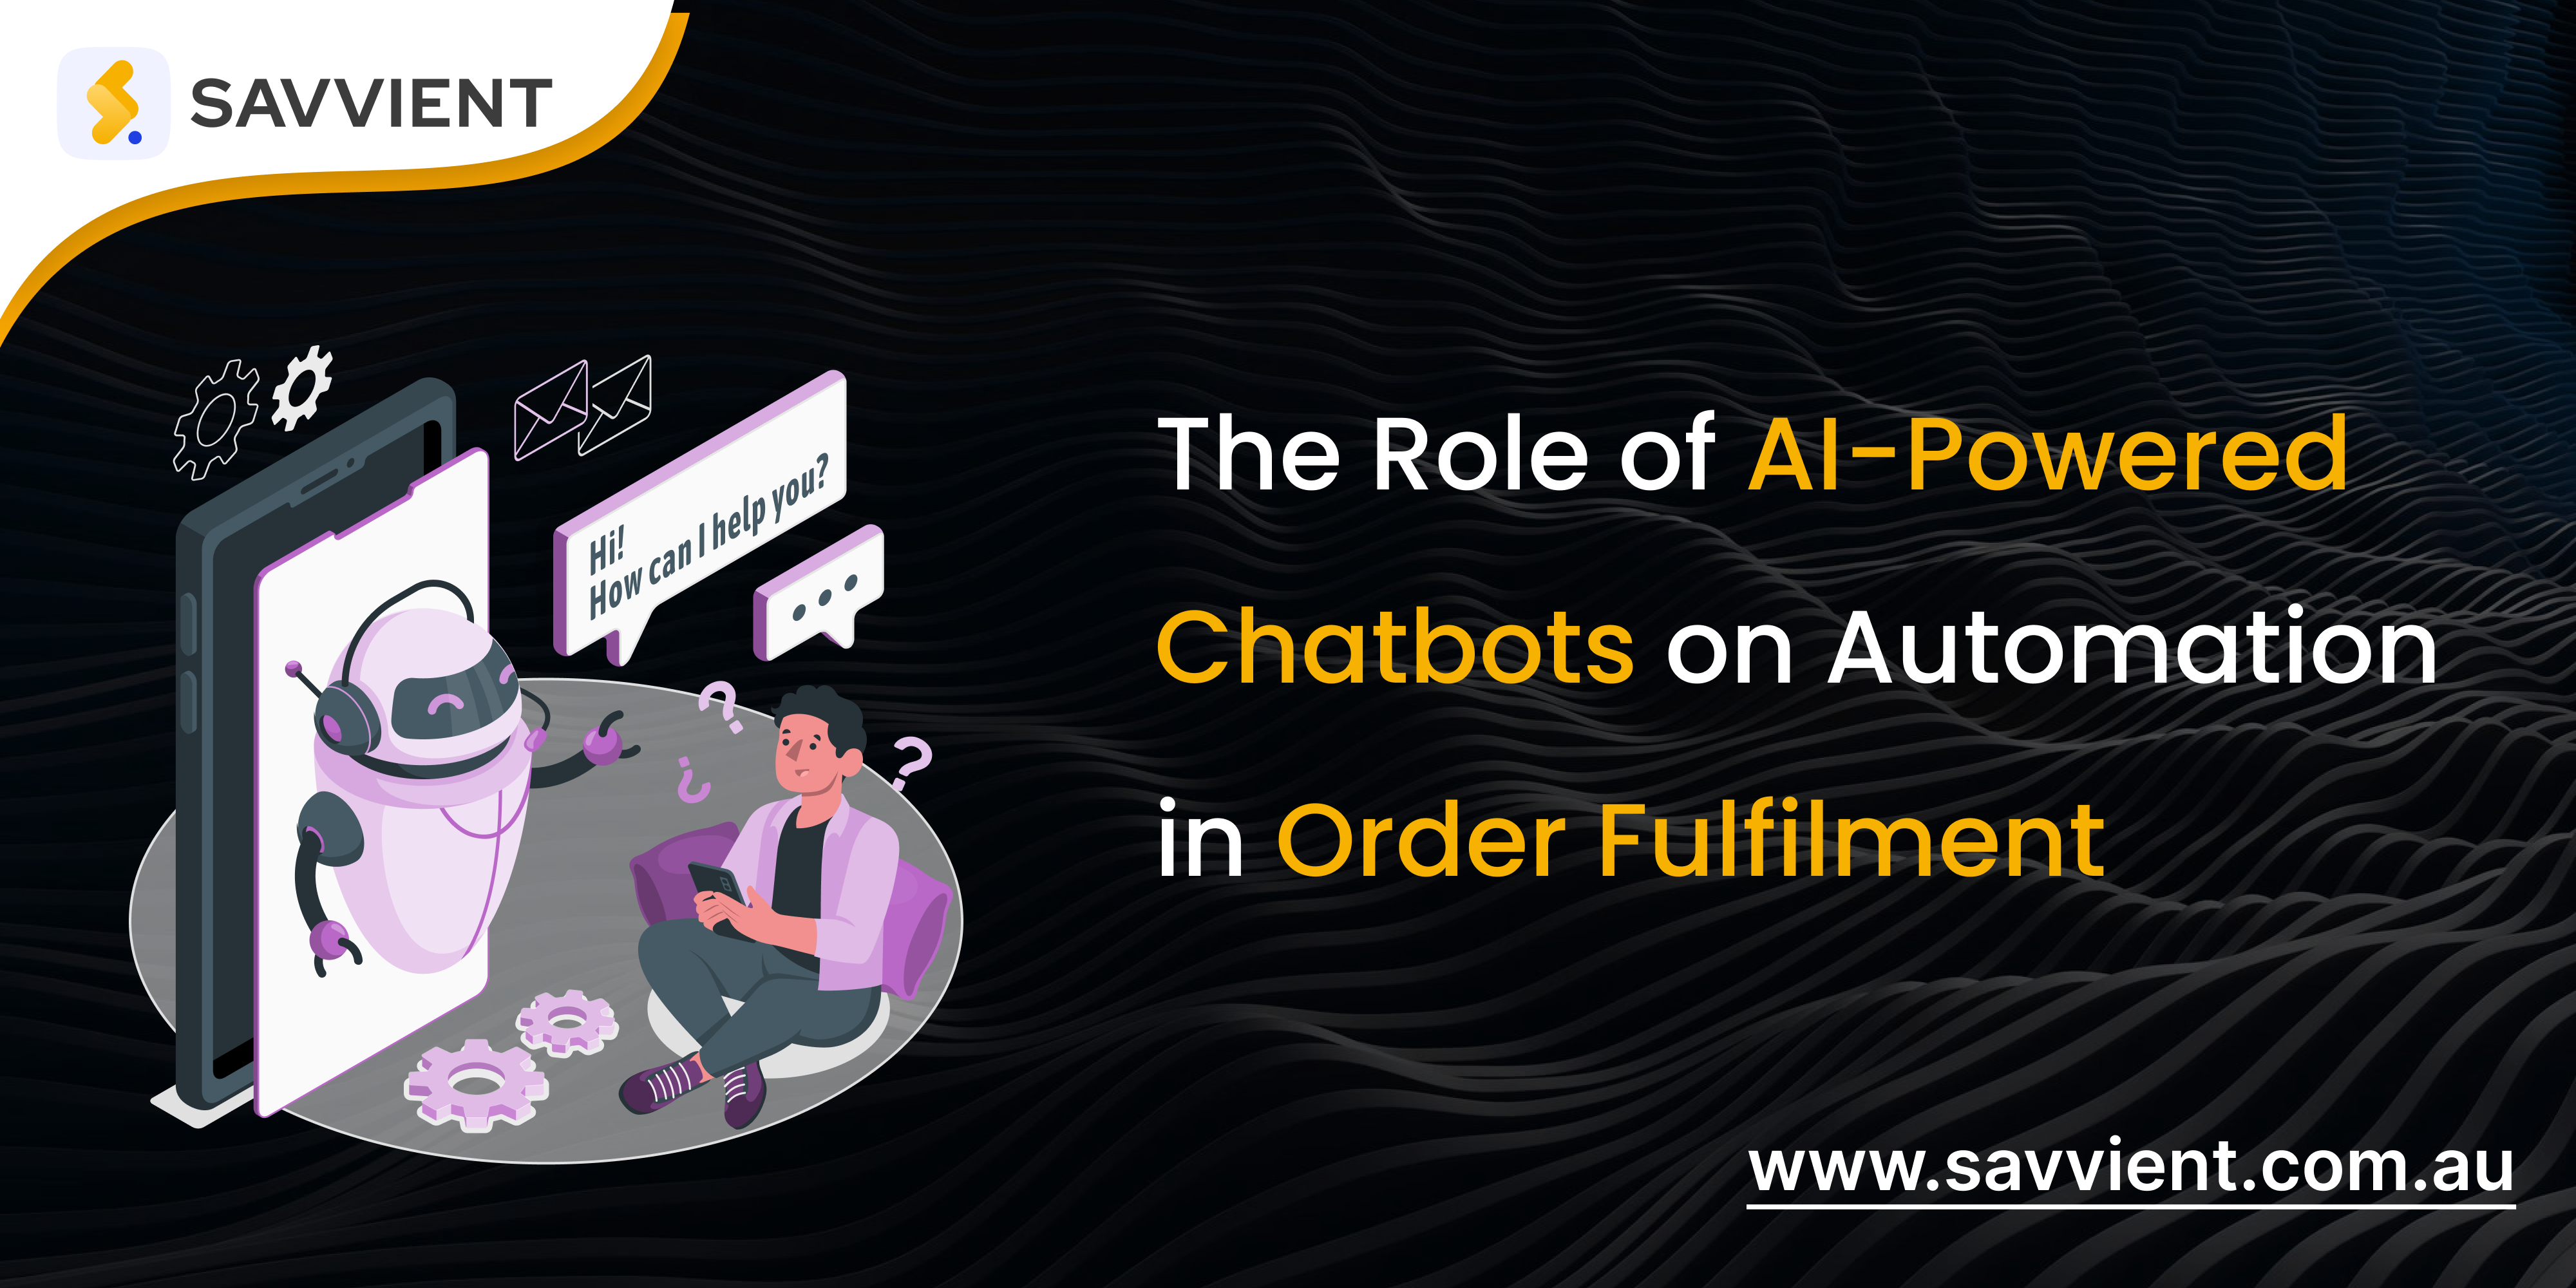 The Role of AI-Powered Chatbots on Automation in Order Fulfillment